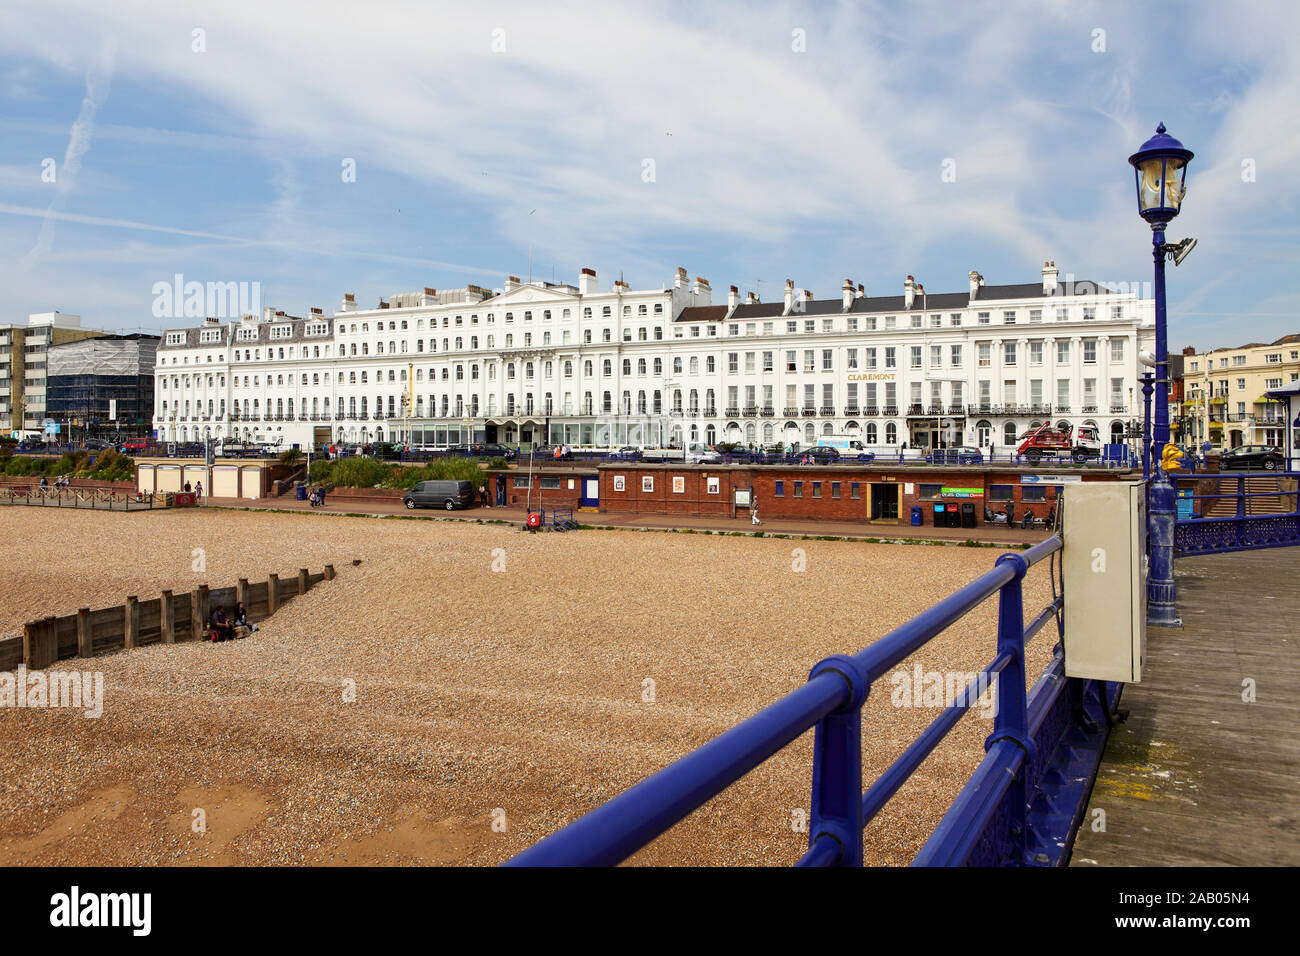 Seafront hotels and pier with multiple groins on Eastbourne beach, viewed here on an overcast day in May 2019. Stock Photo